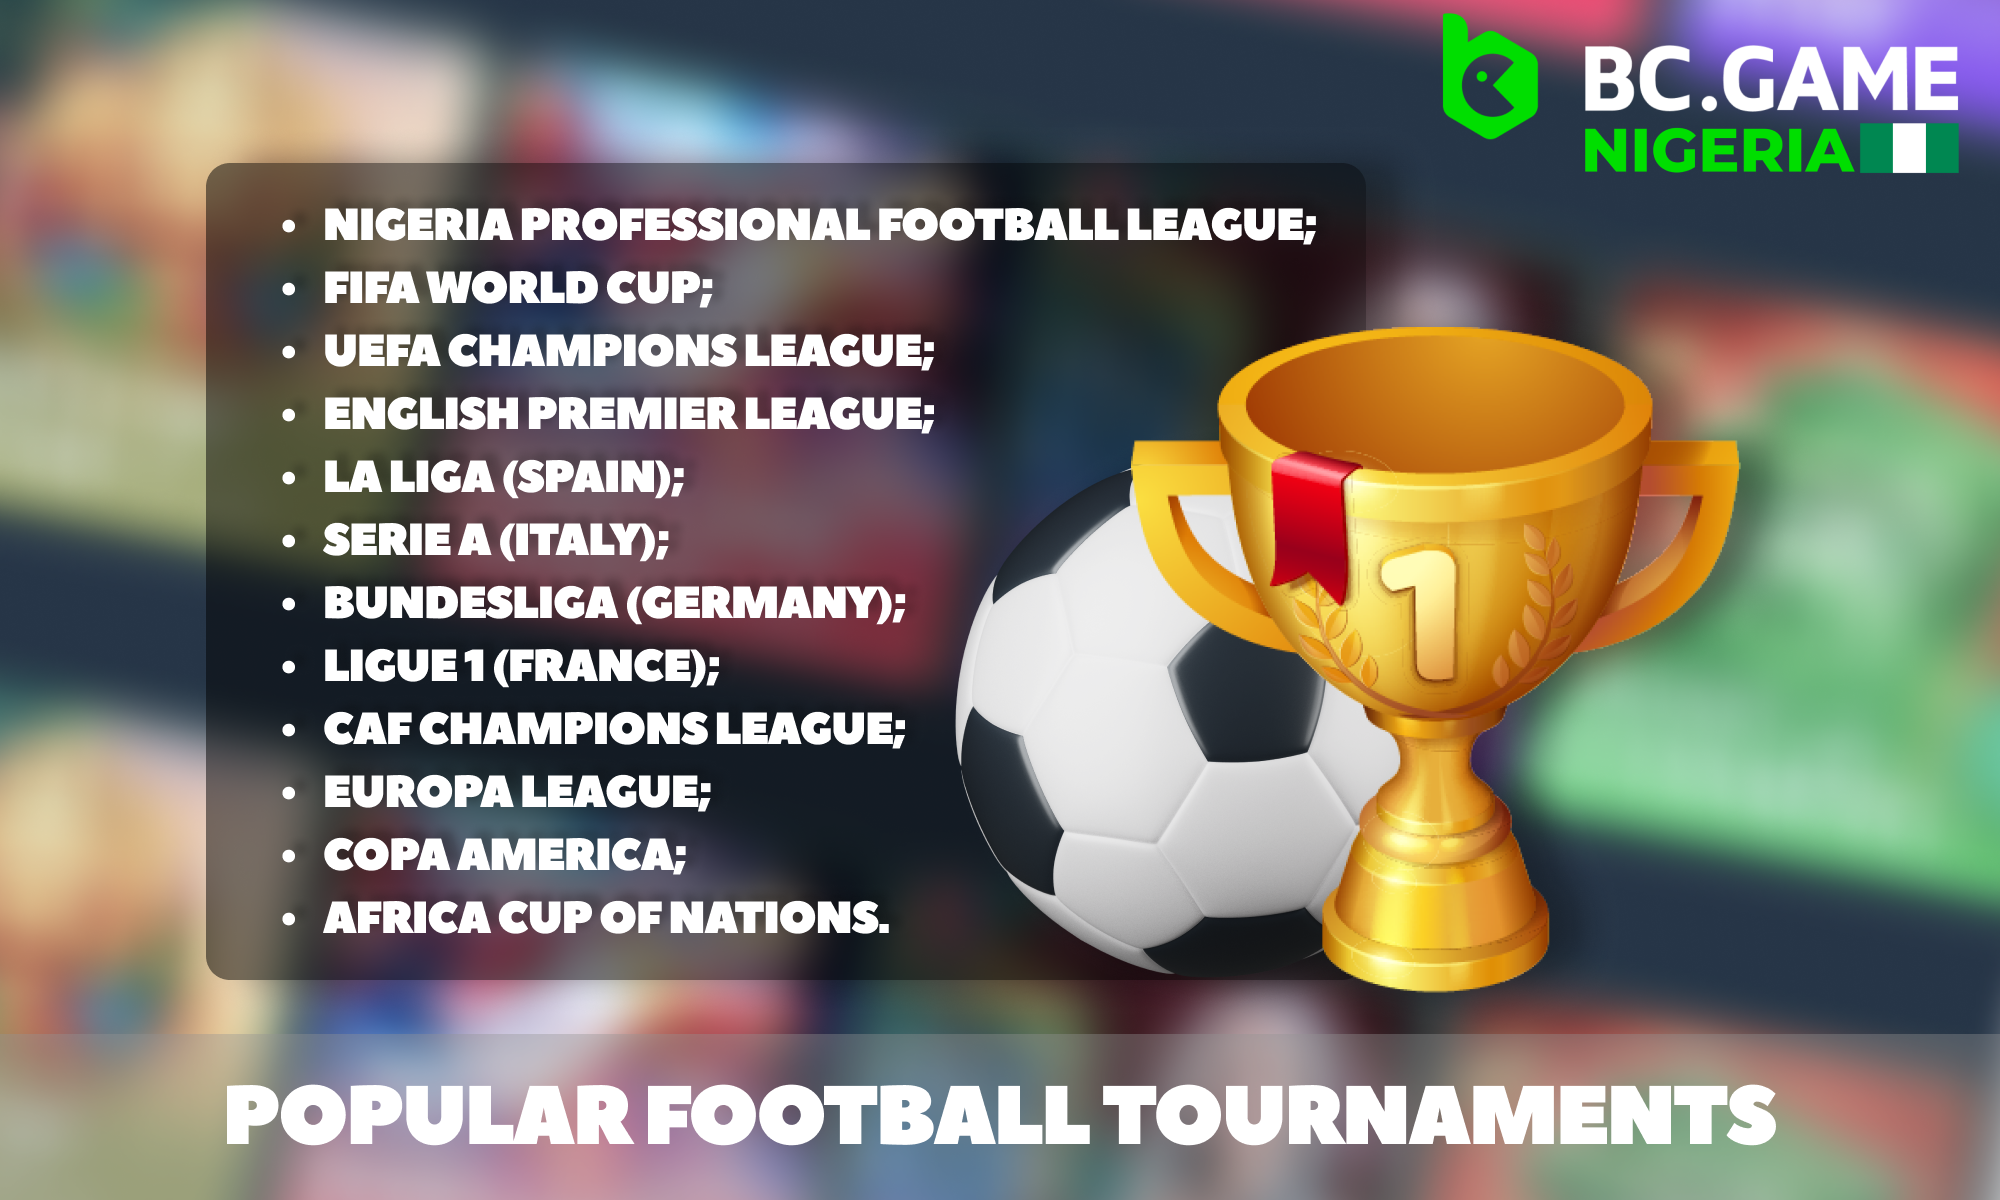 Football tournaments for betting - BC Game Nigeria